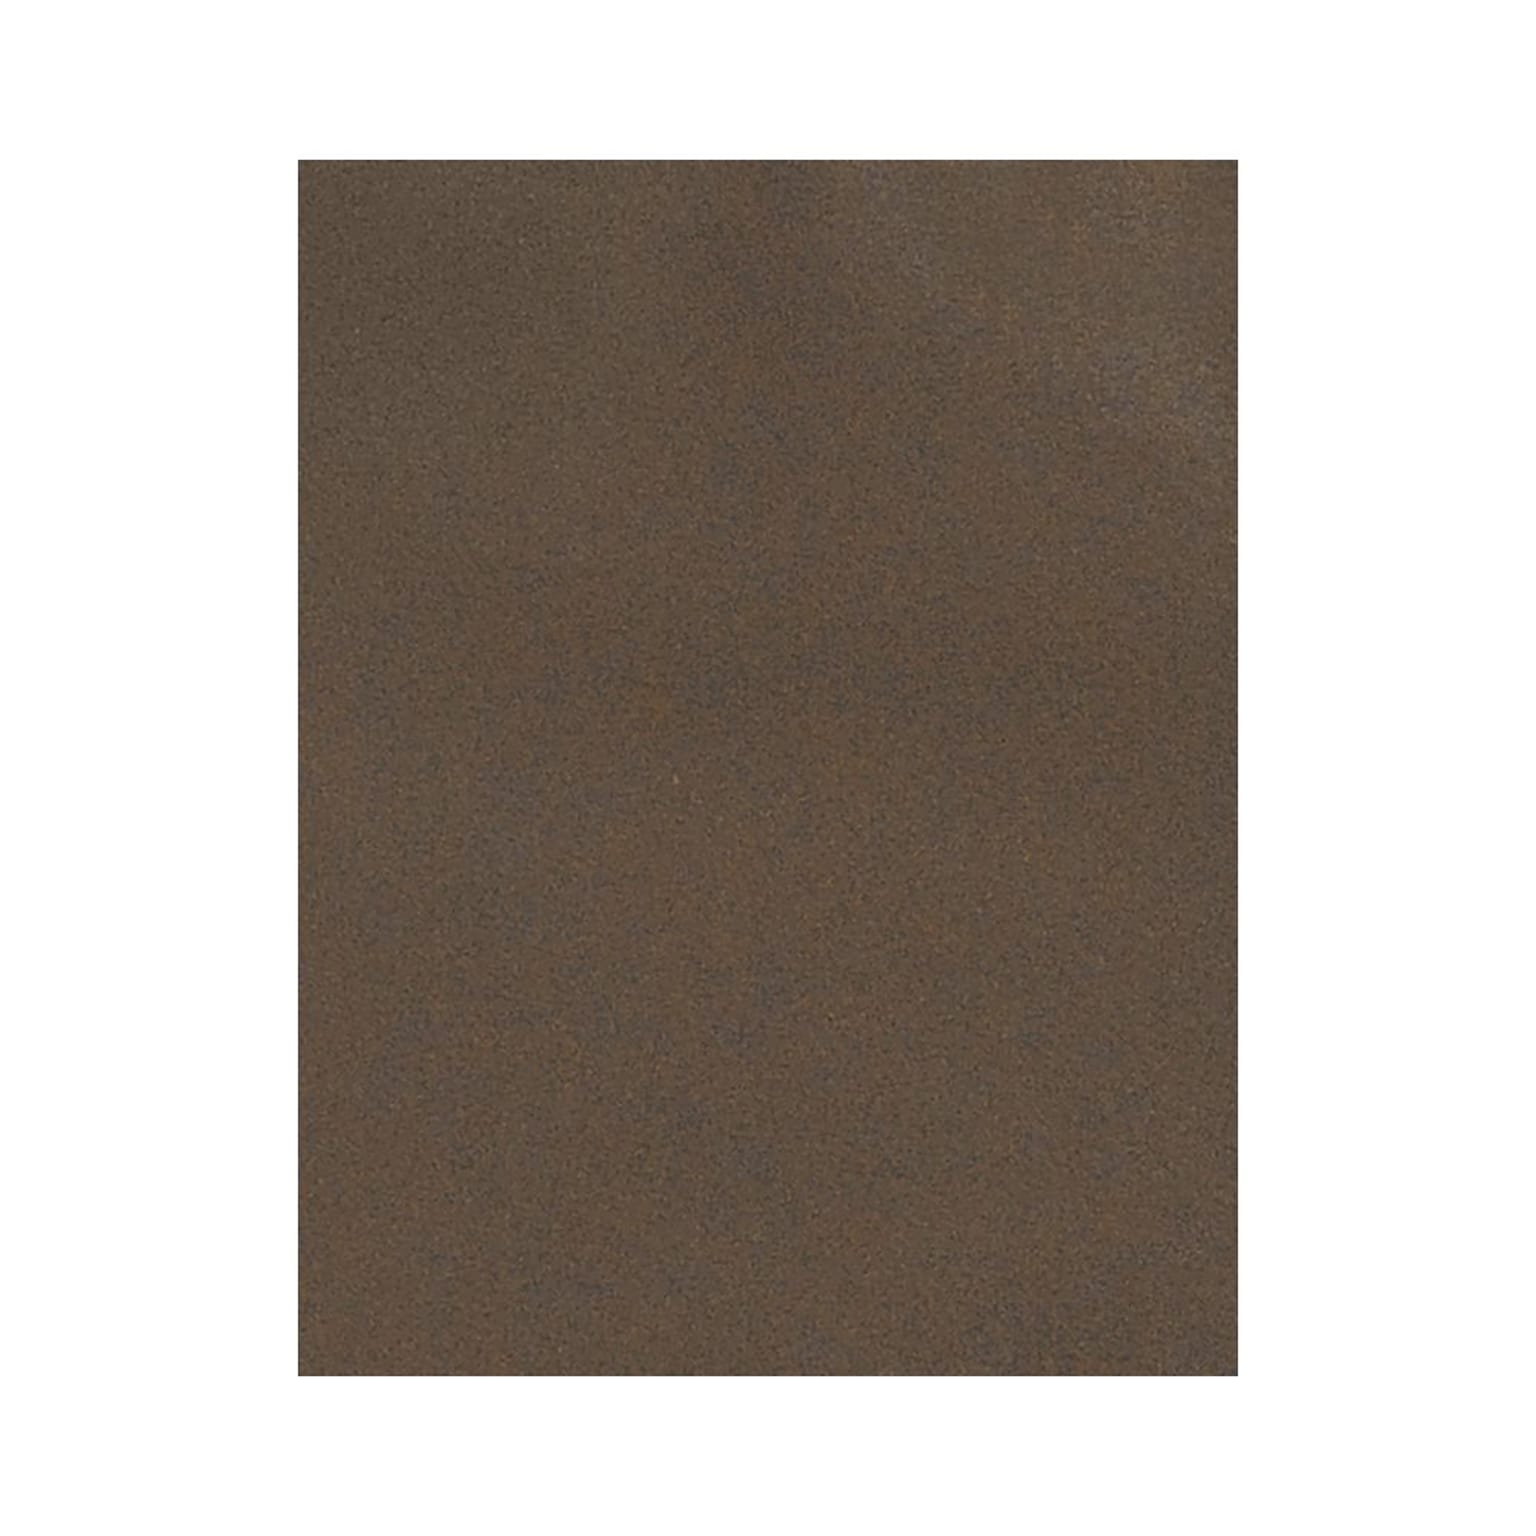 Lux Cardstock 8.5 x 11 inch Chocolate 50/Pack